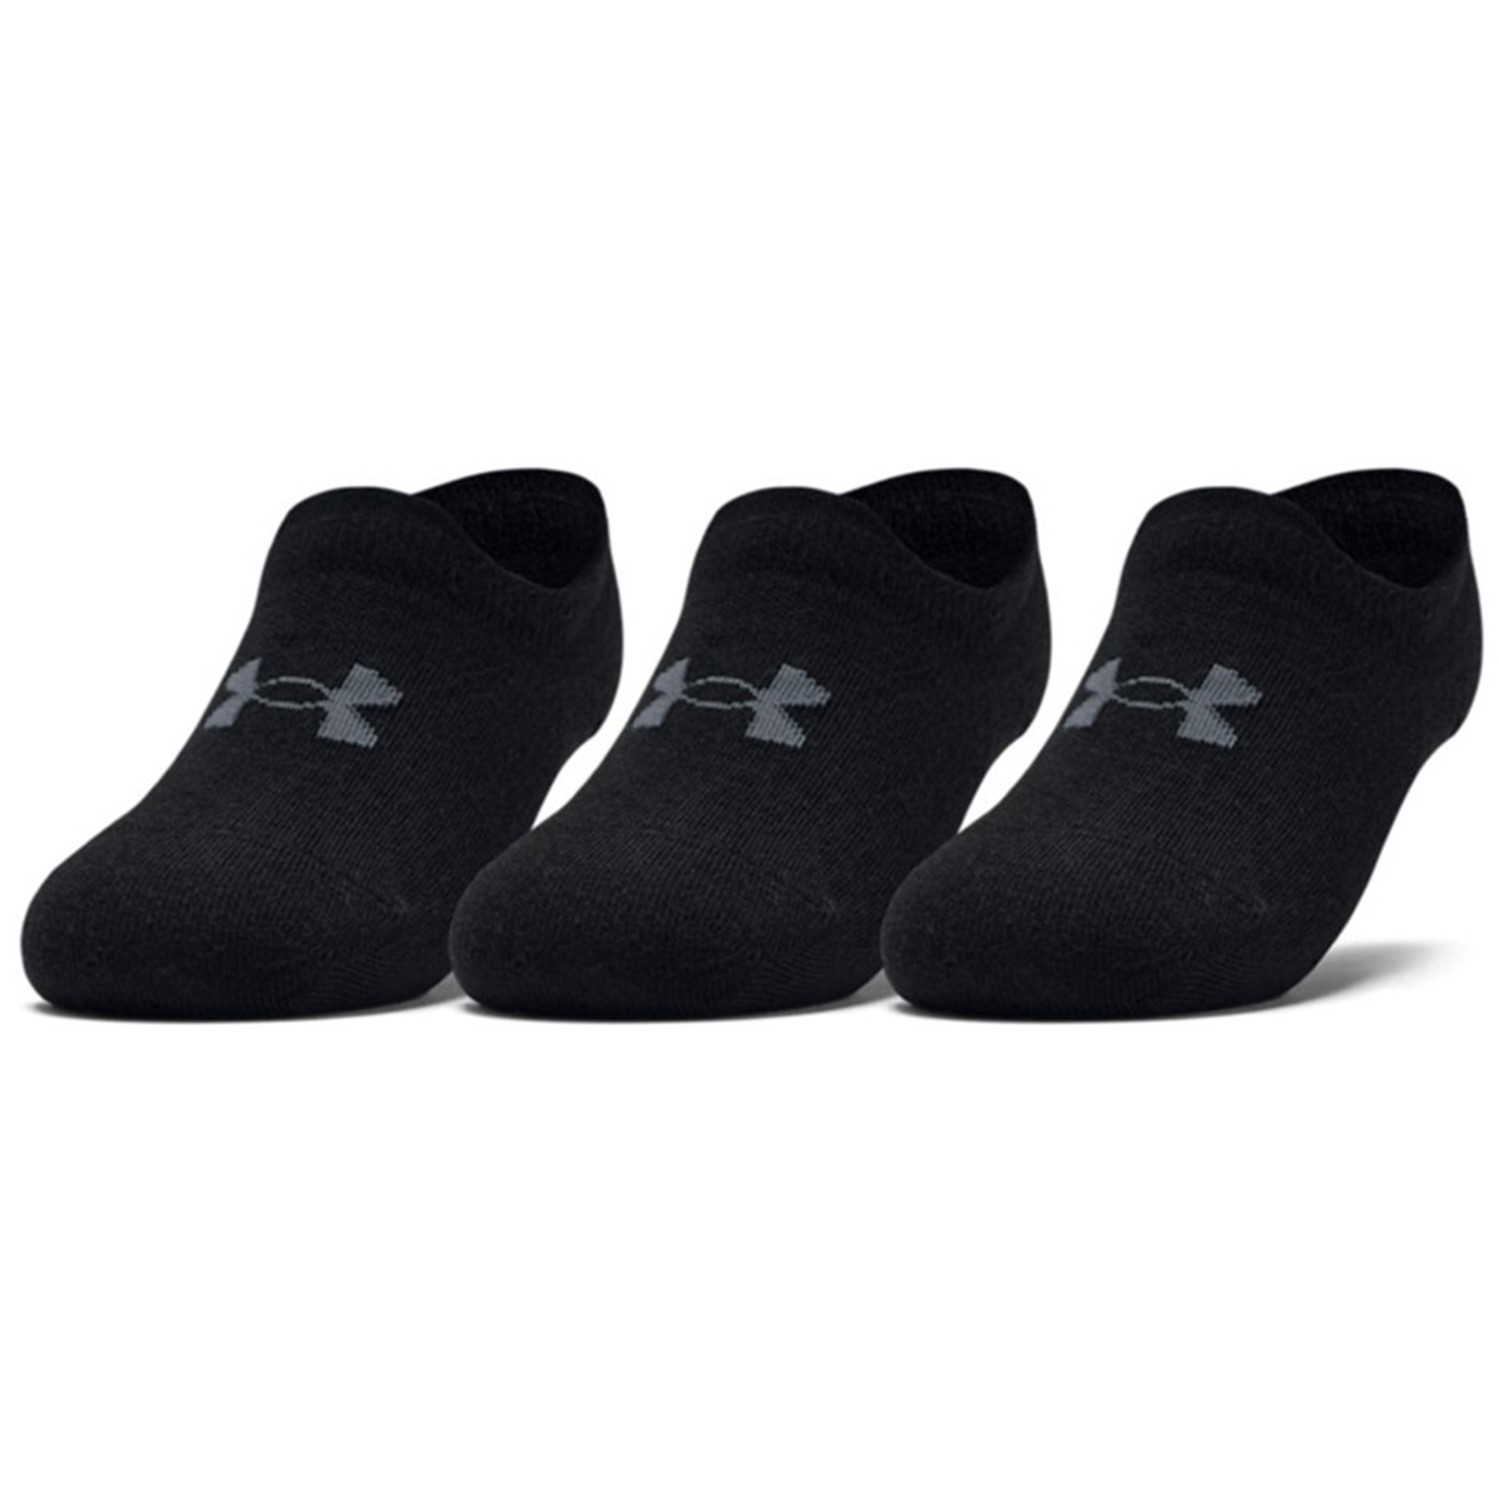 Under Armour Ultra Low Socks